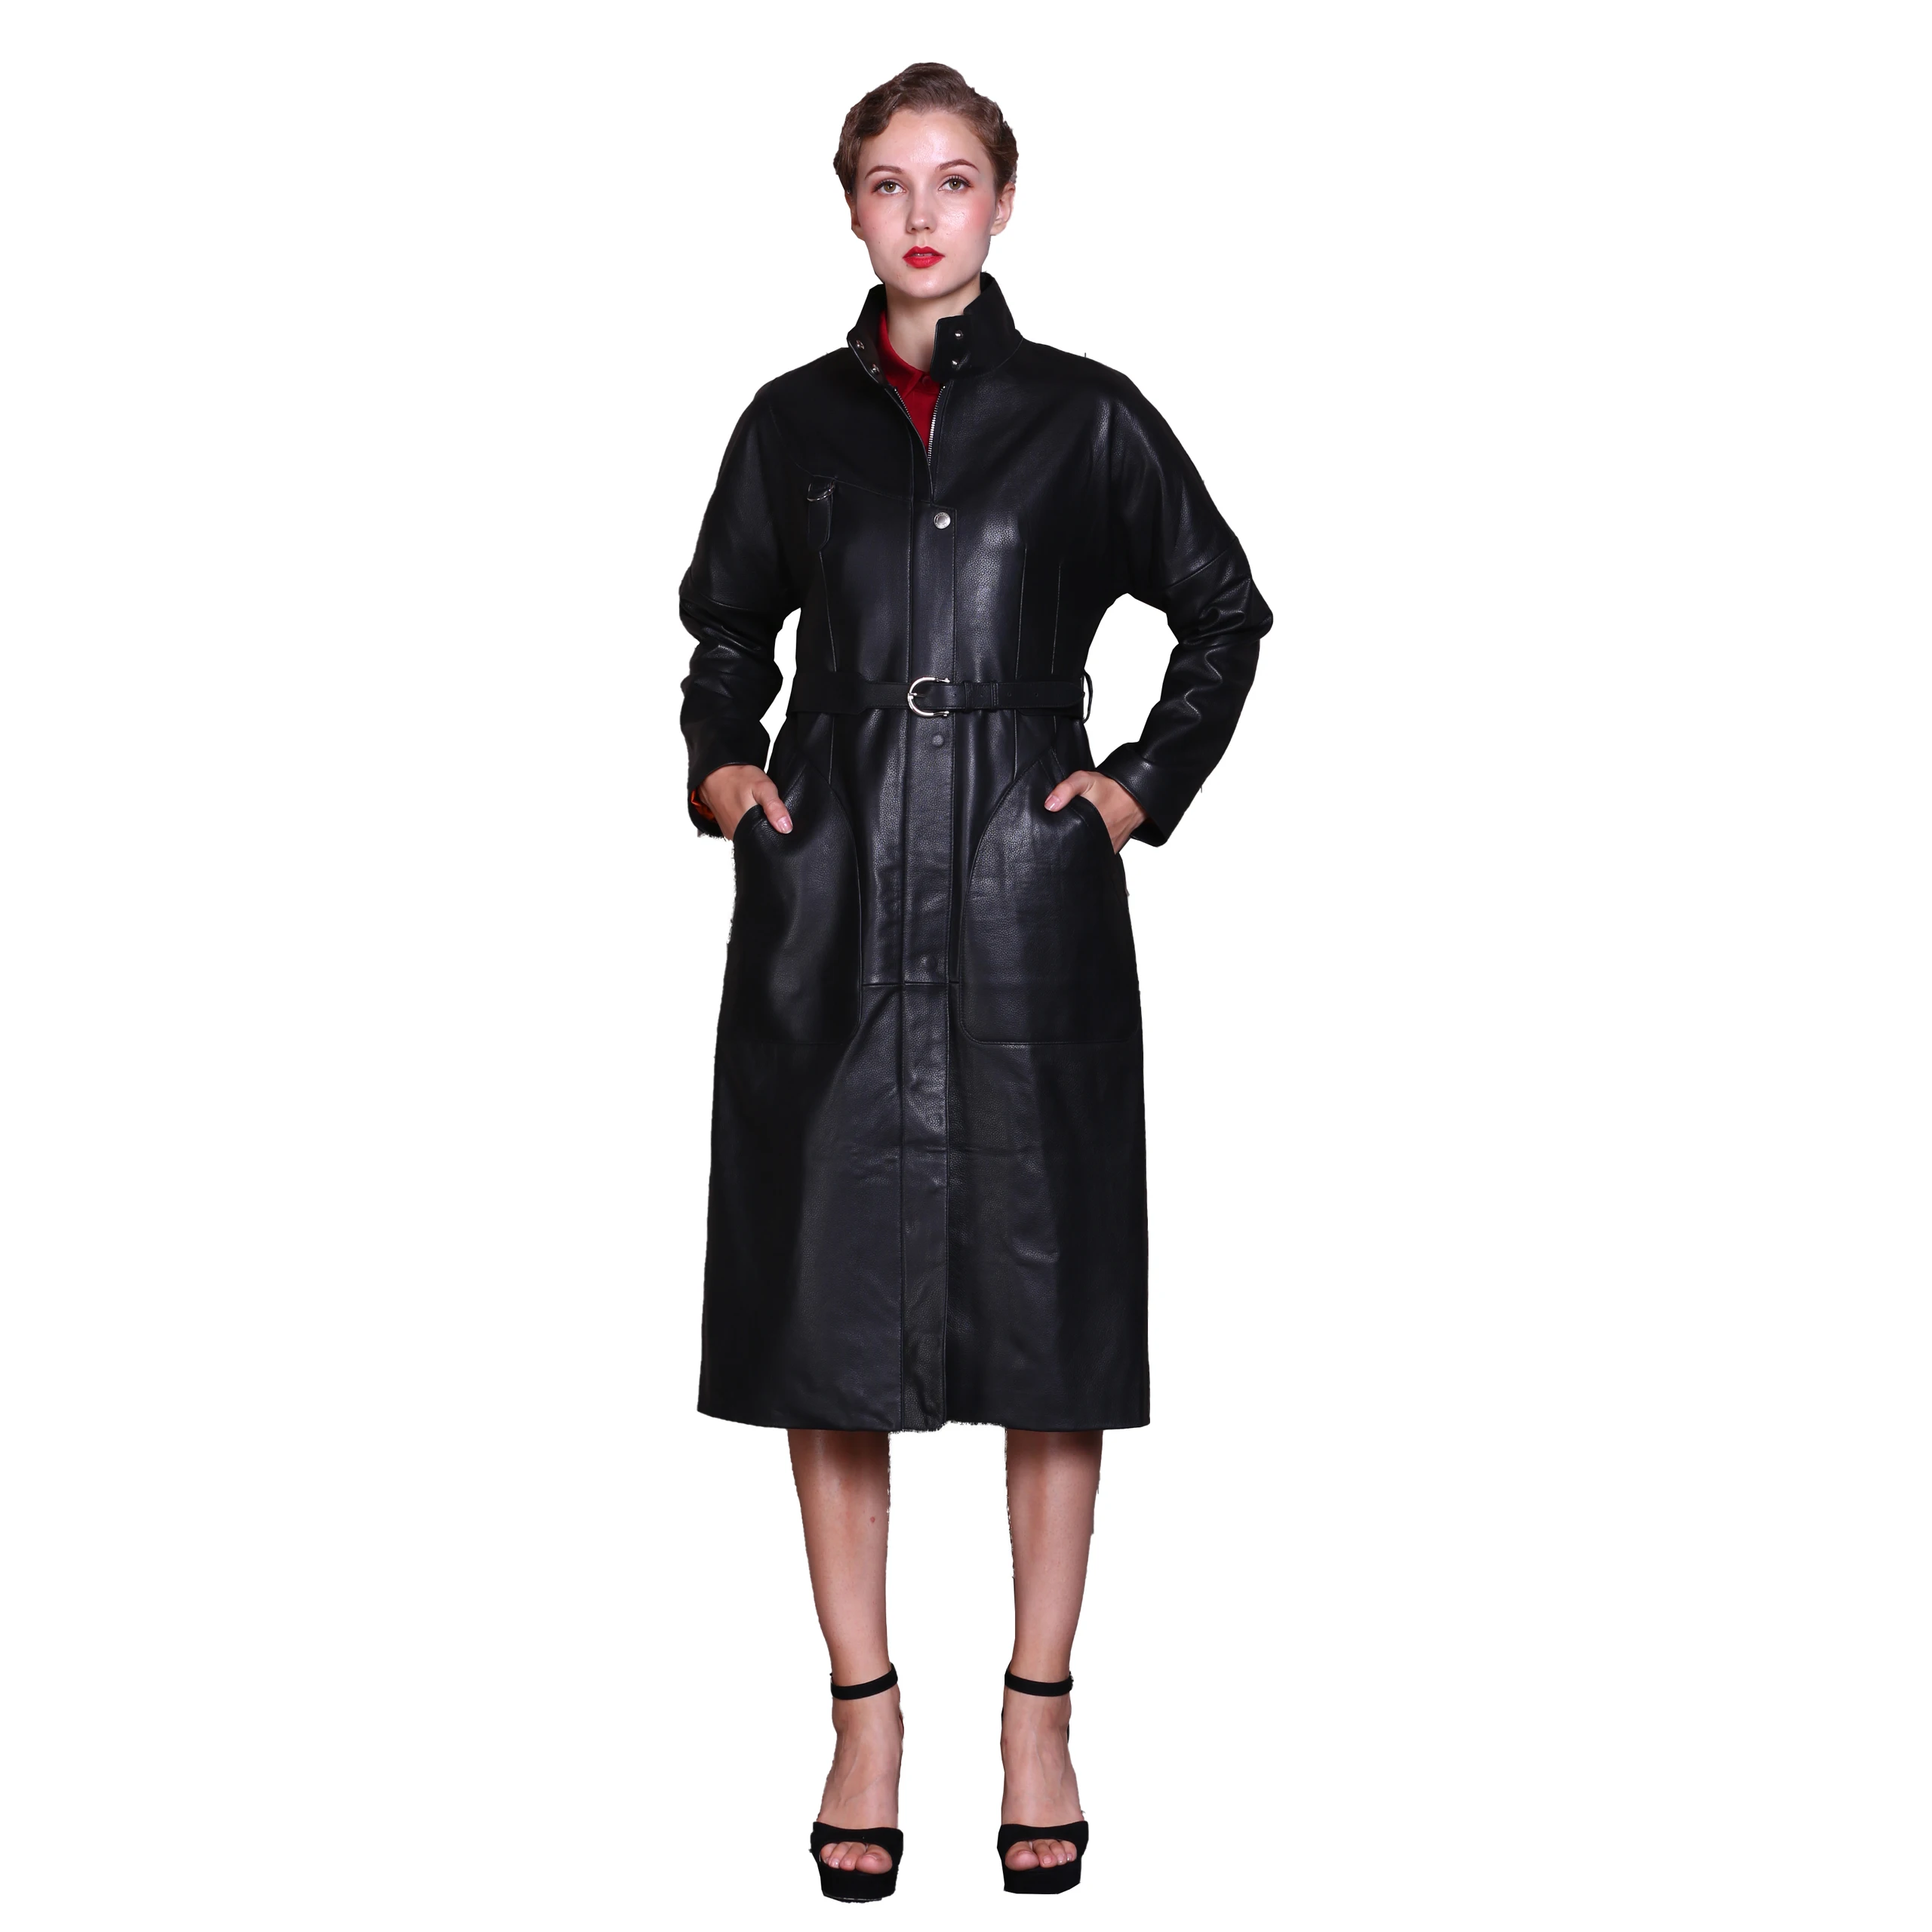 OEM factory direct customized ladies long leather coat with belt, waist and collar